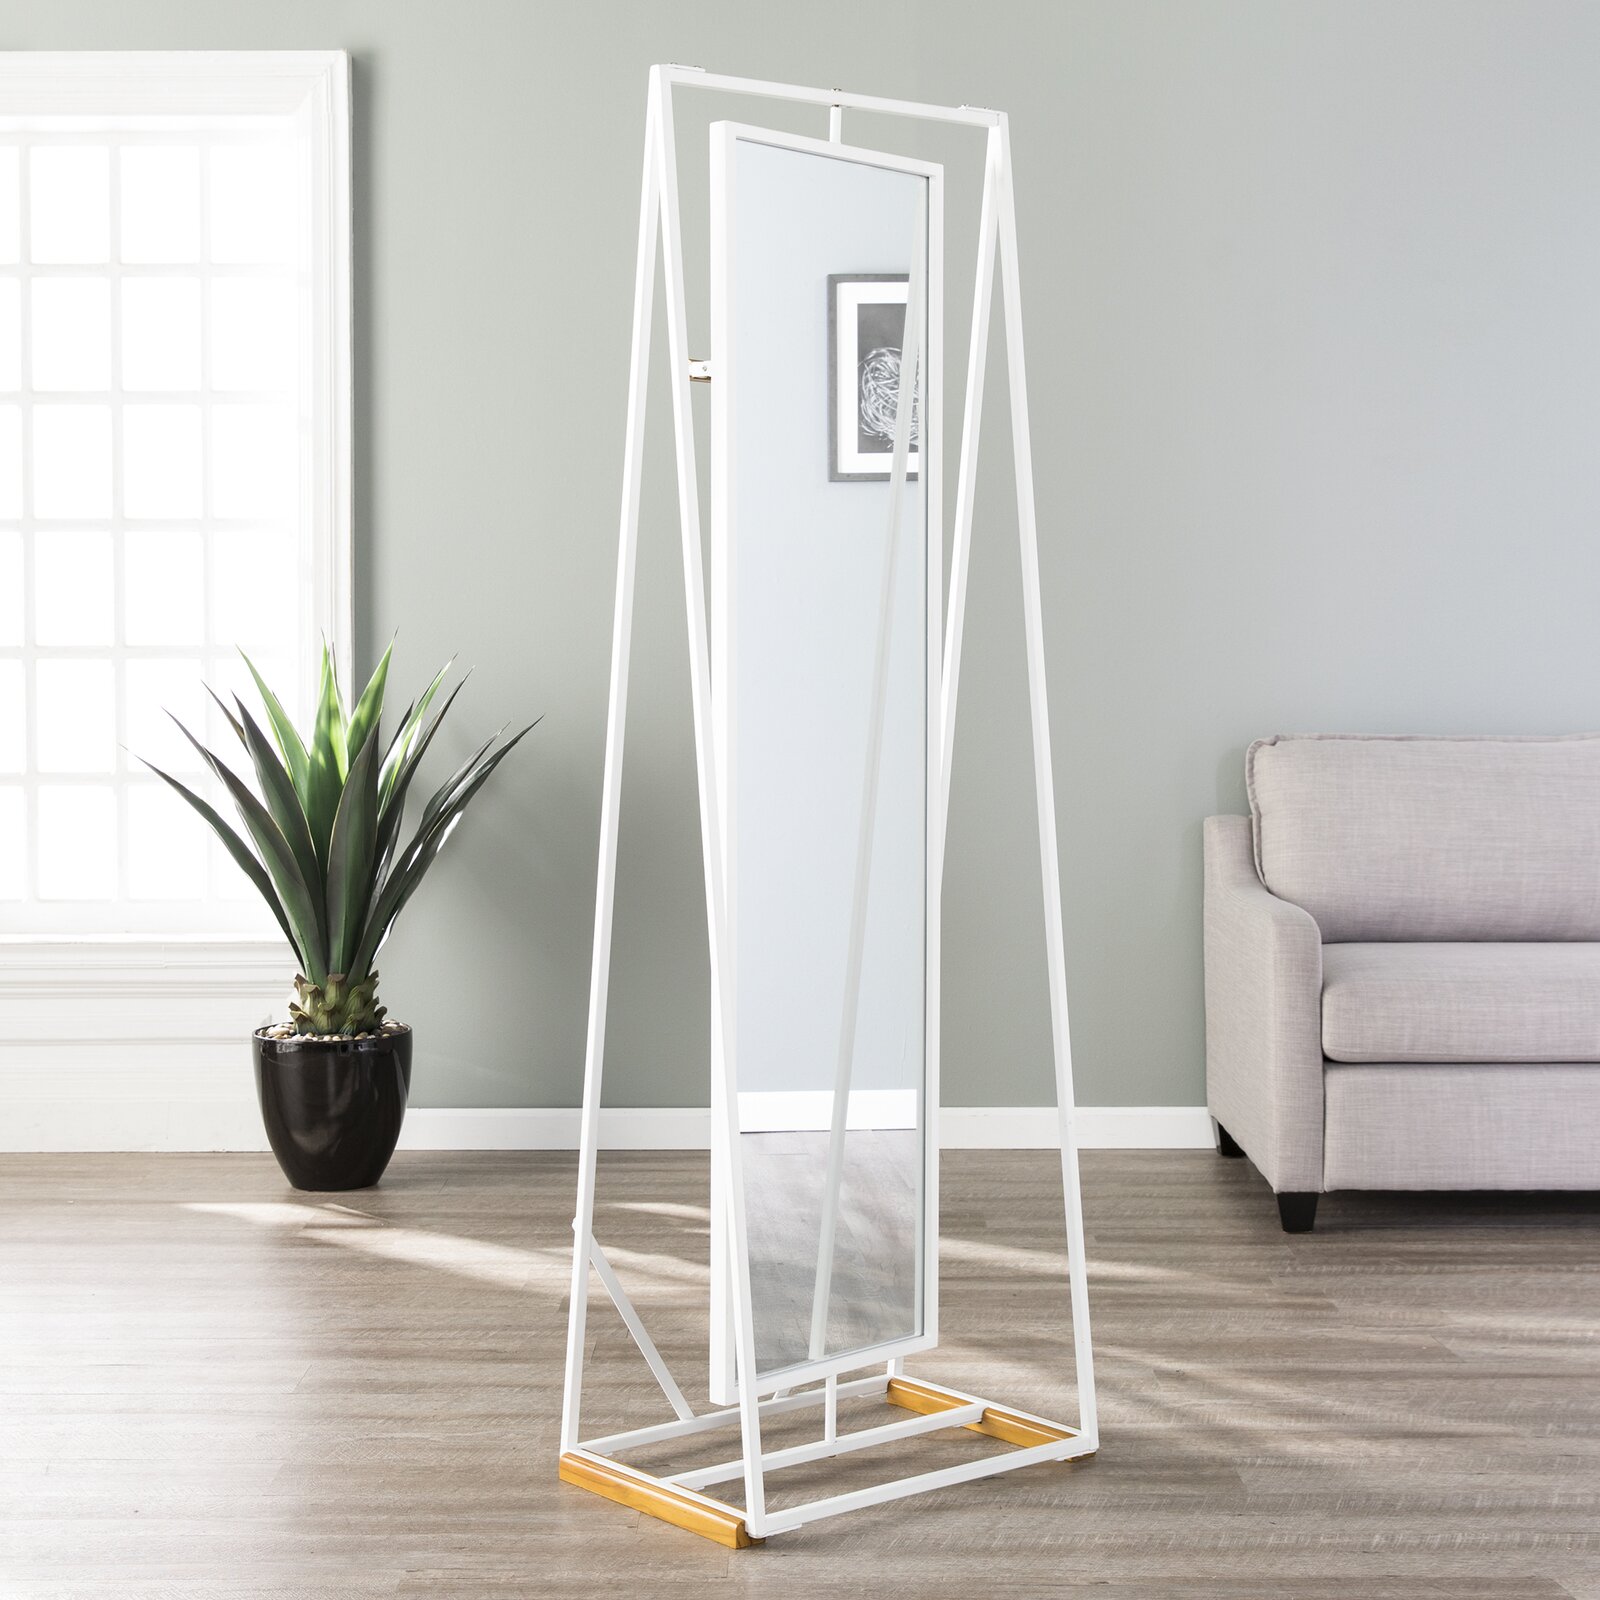 51 Full Length Mirrors To Flatter Your, How To Use A Floor Mirror